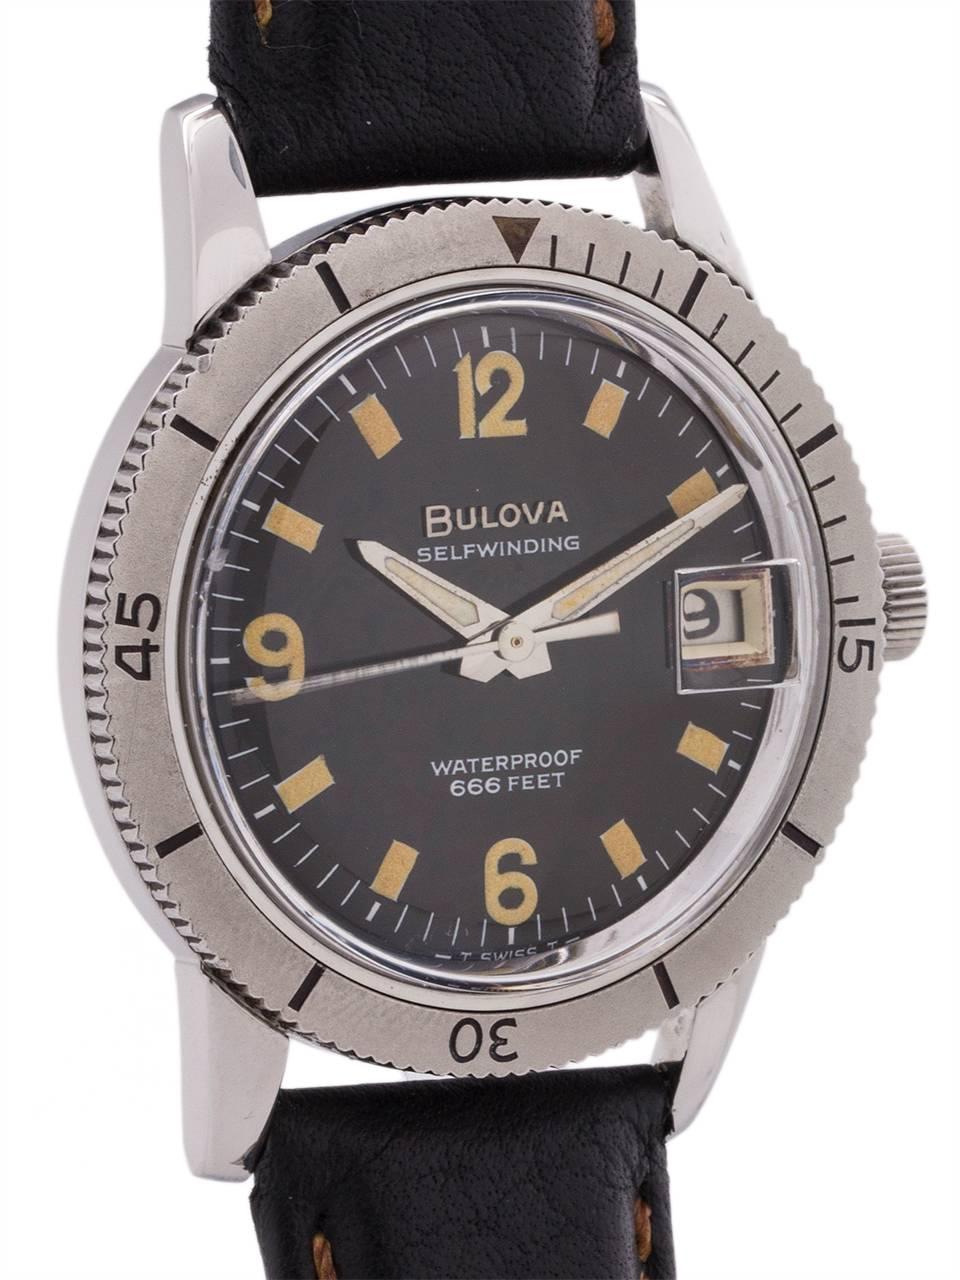 
Bulova diver’s model stainless steel ref 386-1 circa 1960s. Featuring a 34mm diameter case with rotating elapsed time bezel, an especially beautiful original gloss black dial with richly patina’d luminous indexes and matching patina’d shovel style